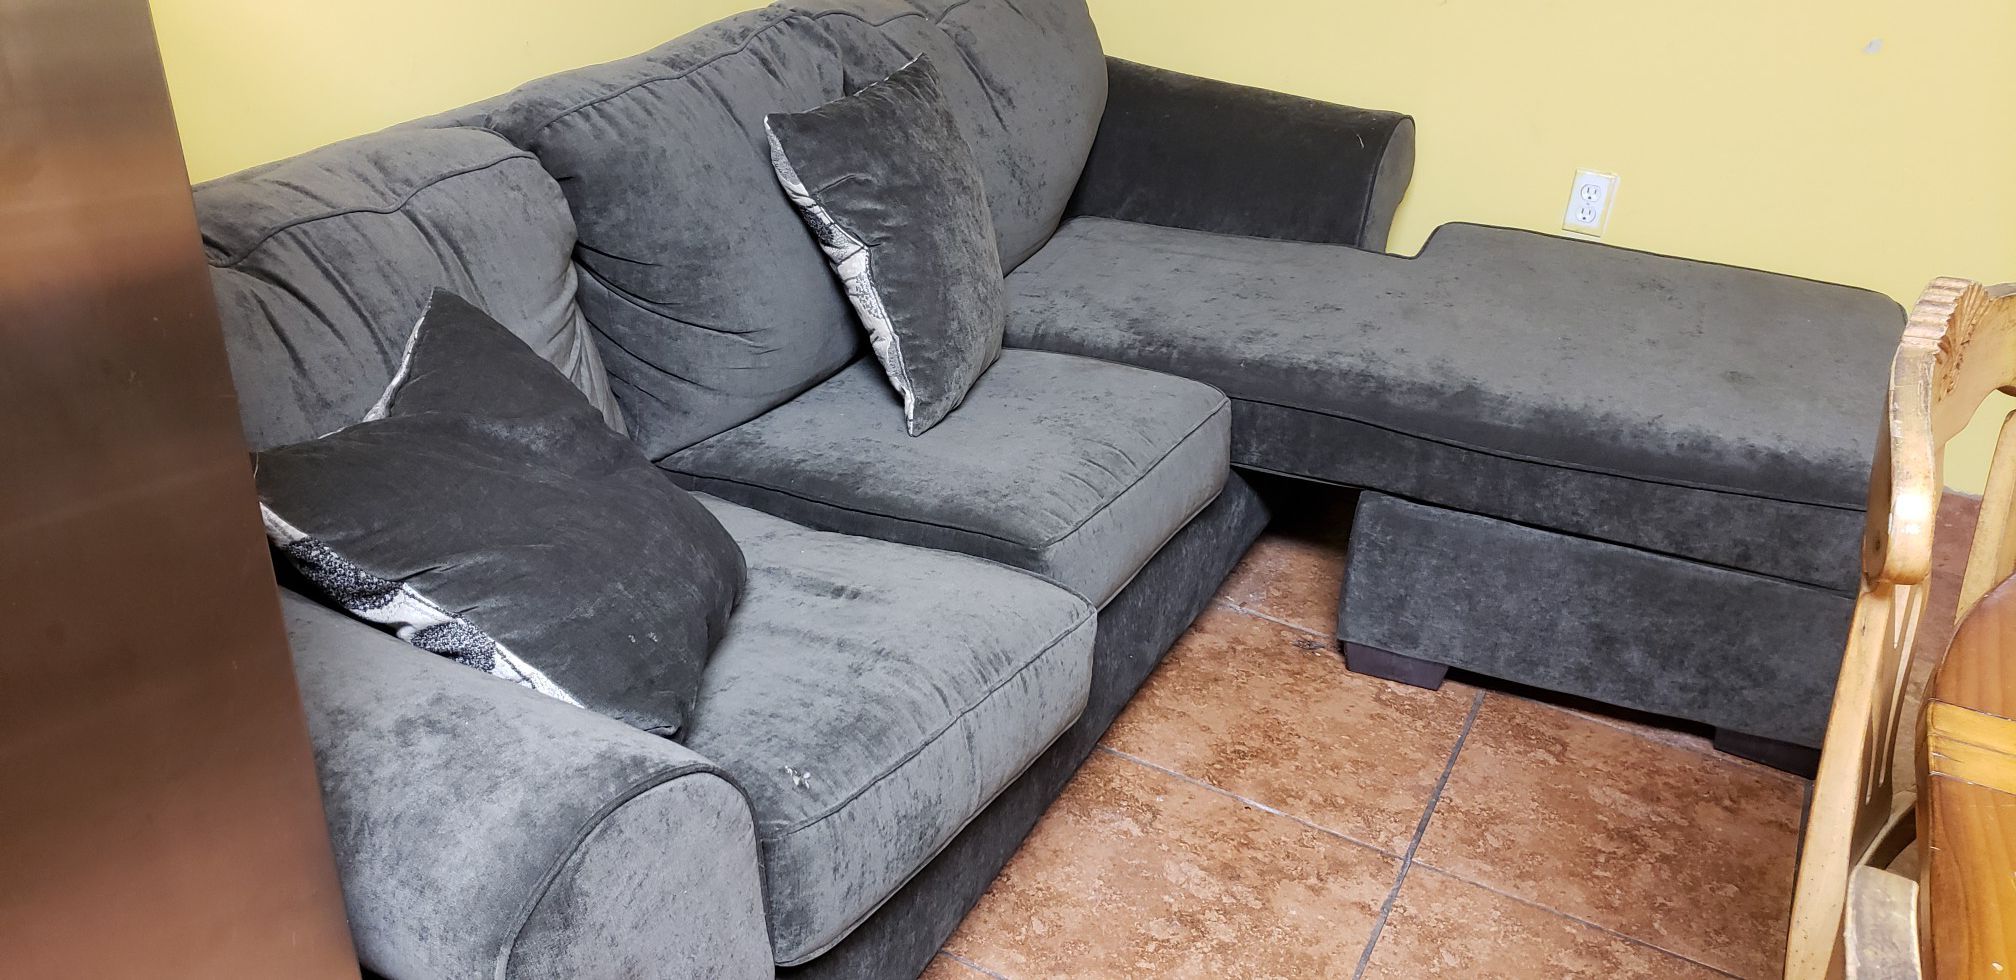 Free sofa and pull out bed need gone today monday 15